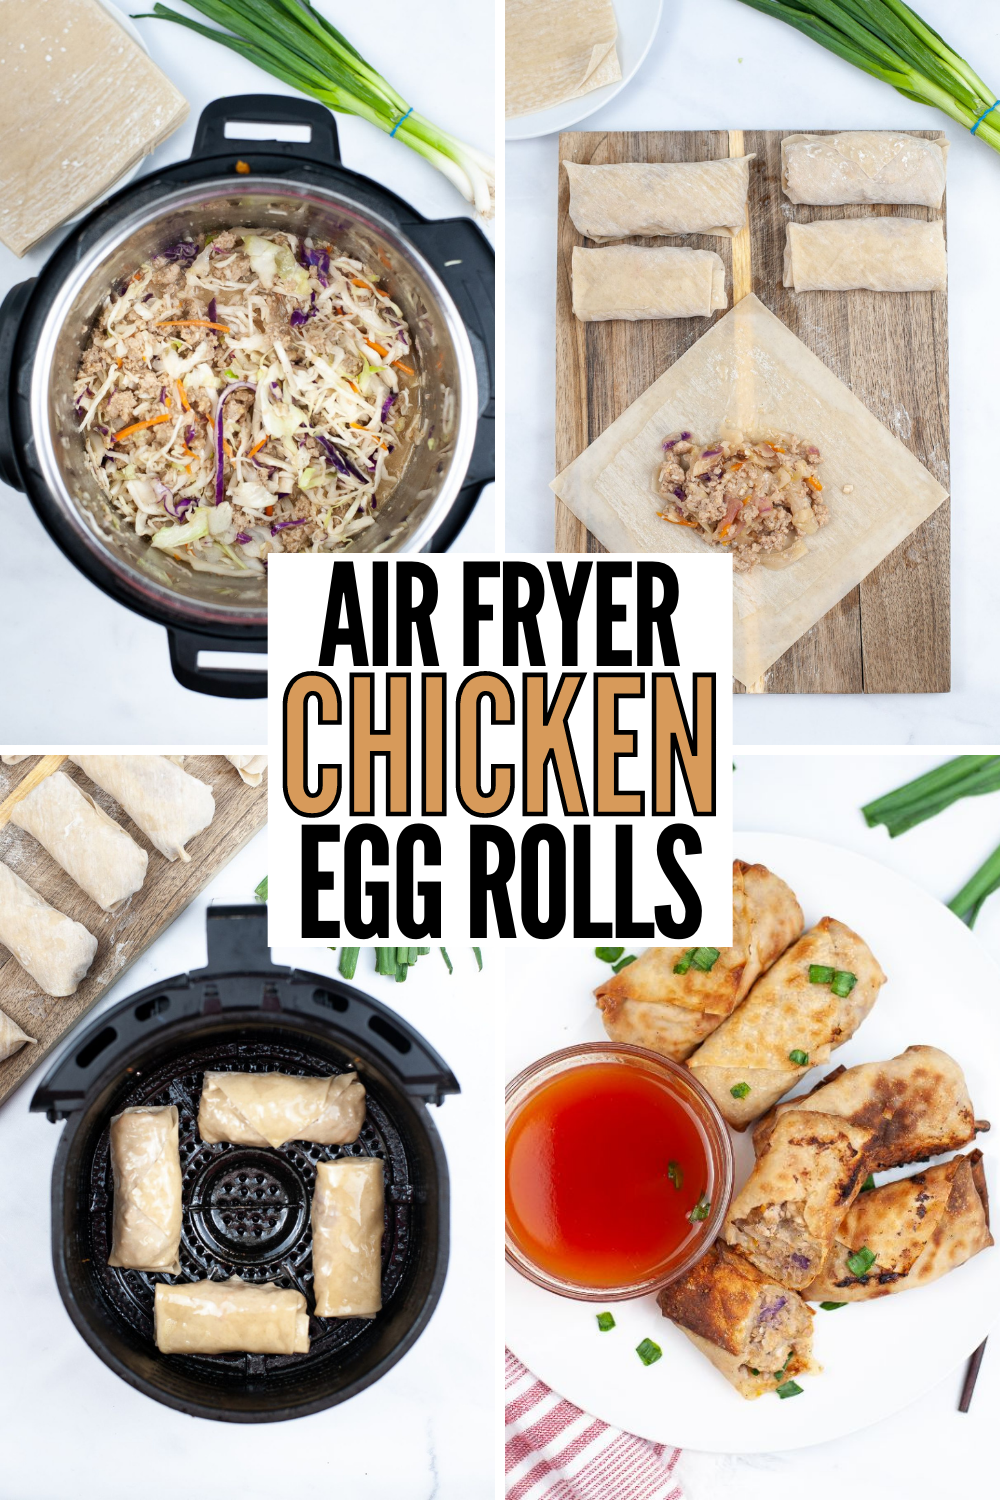 A collage of 4 images needed to make Air Fryer Chicken Egg Rolls with a large text in the middle saying "Air Fryer Chicken Egg Rolls".